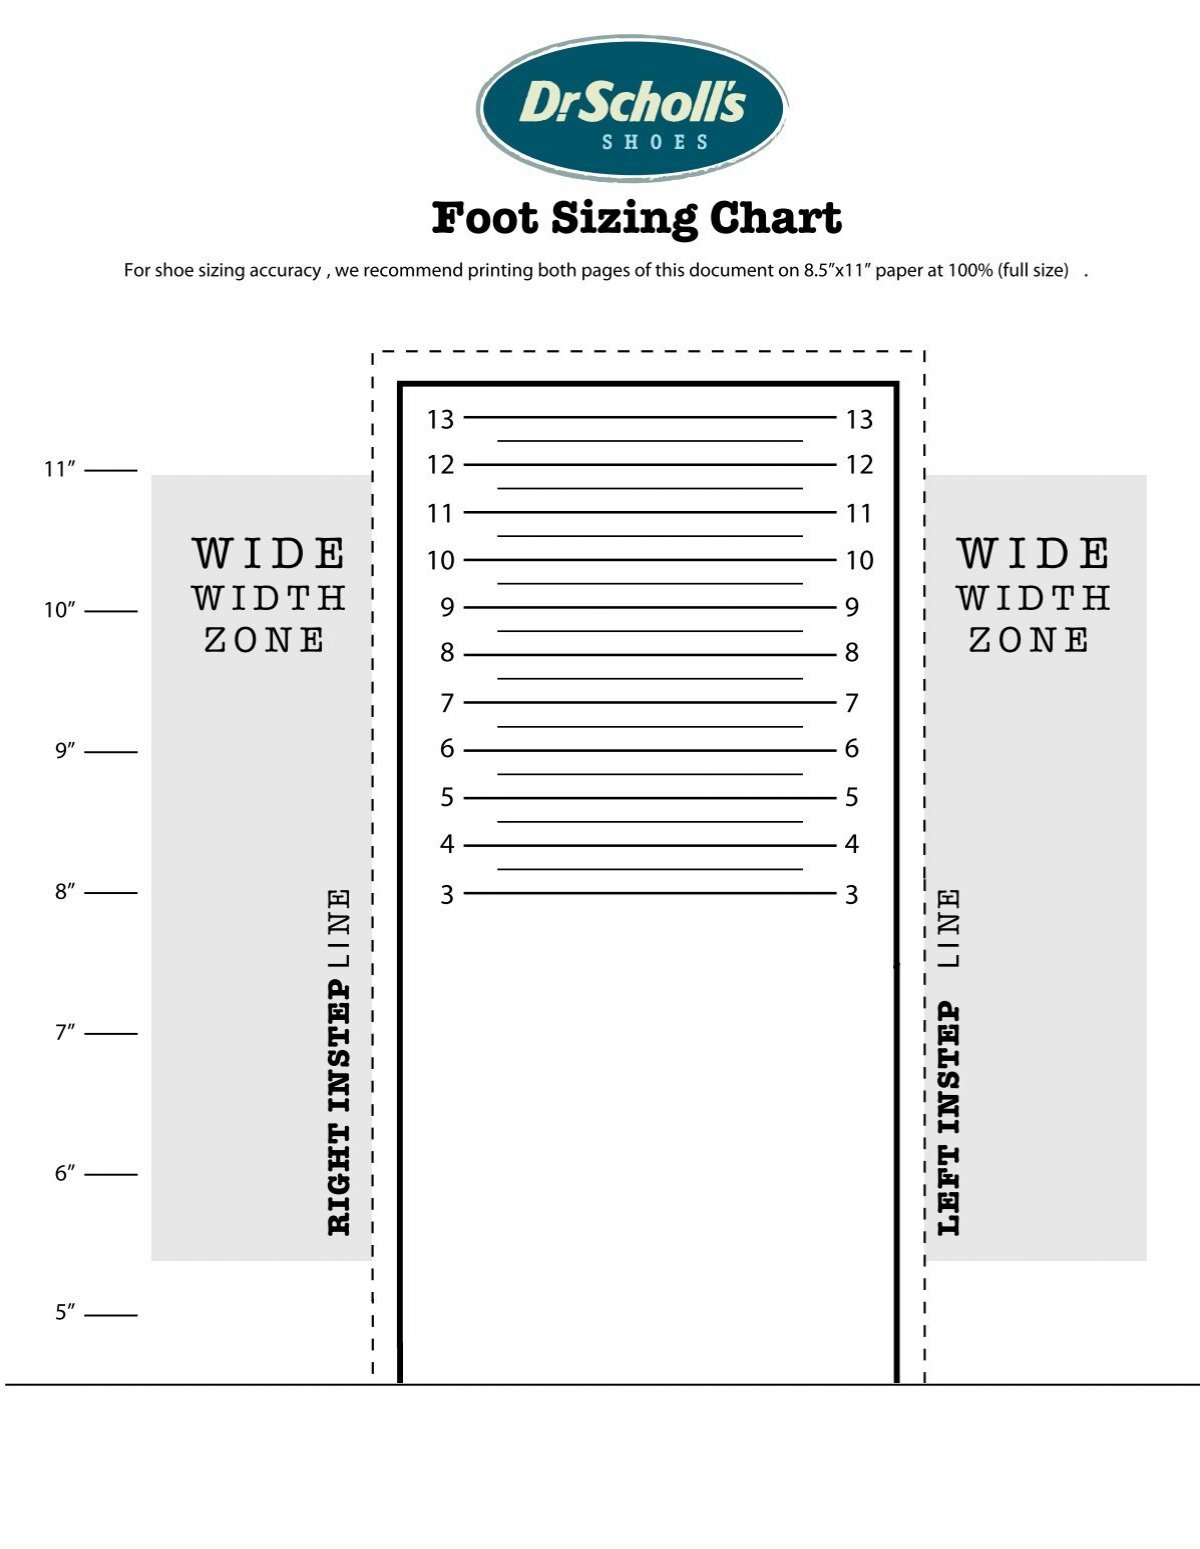 Foot Sizing Chart - Dr. Scholl's Shoes